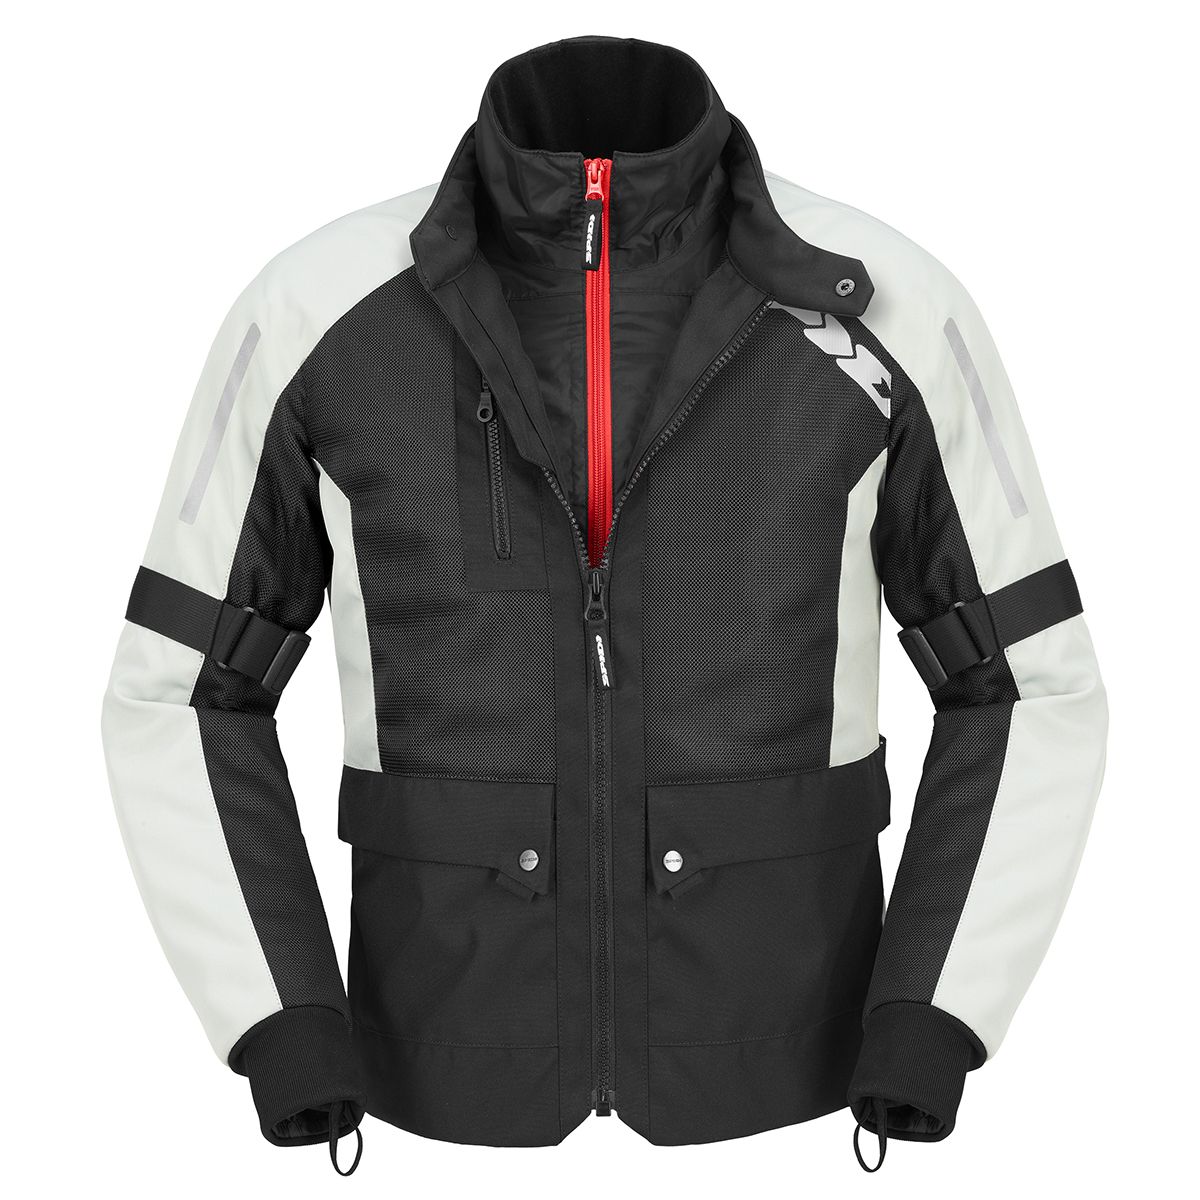 Image of Spidi Net H2OUT Jacket Black Ice Size 2XL ID 8030161488883